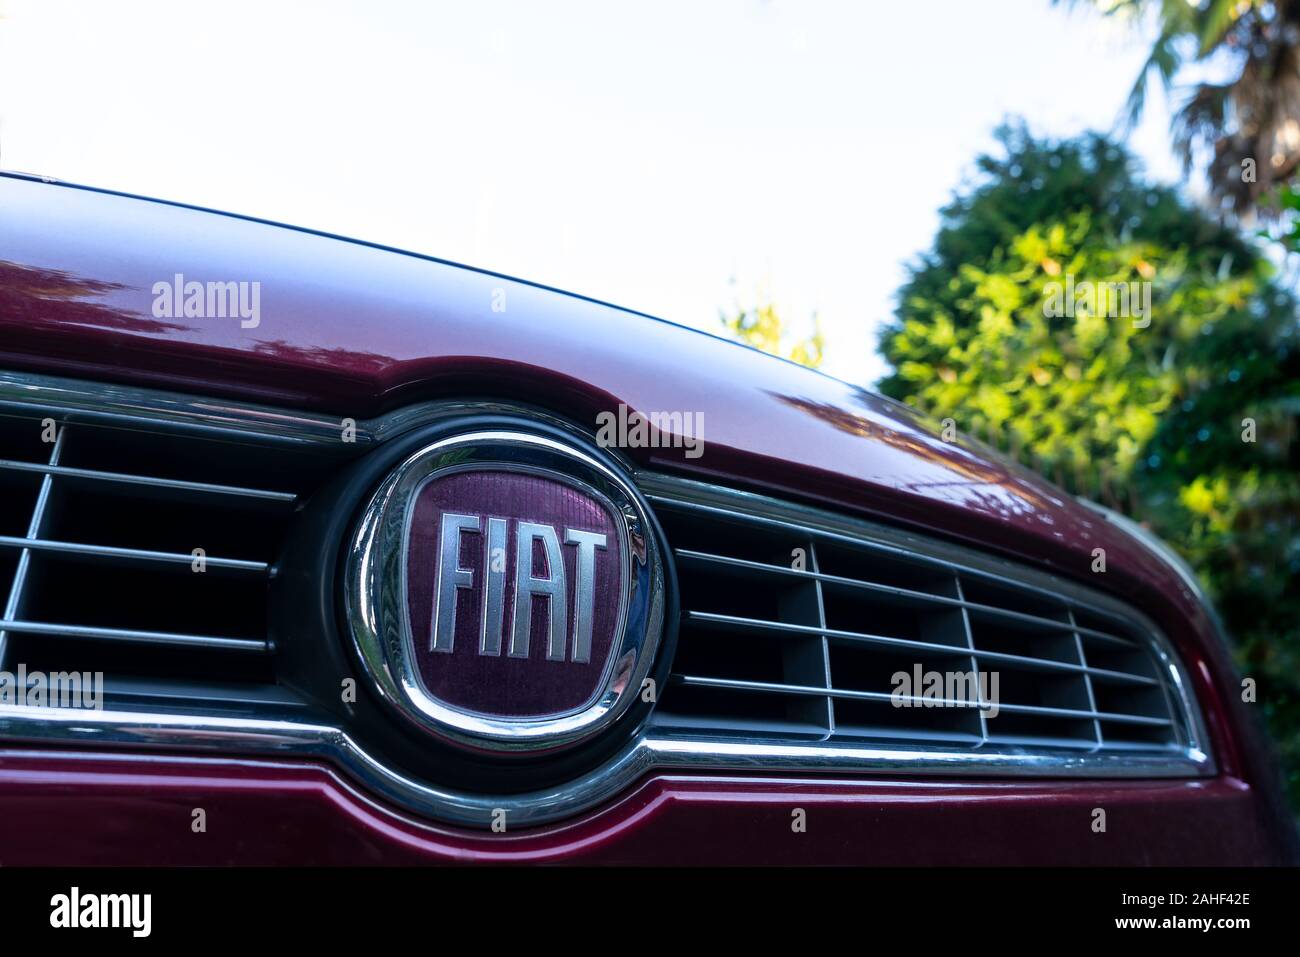 the emblem of the FIAT car brand on the front of a car Stock Photo